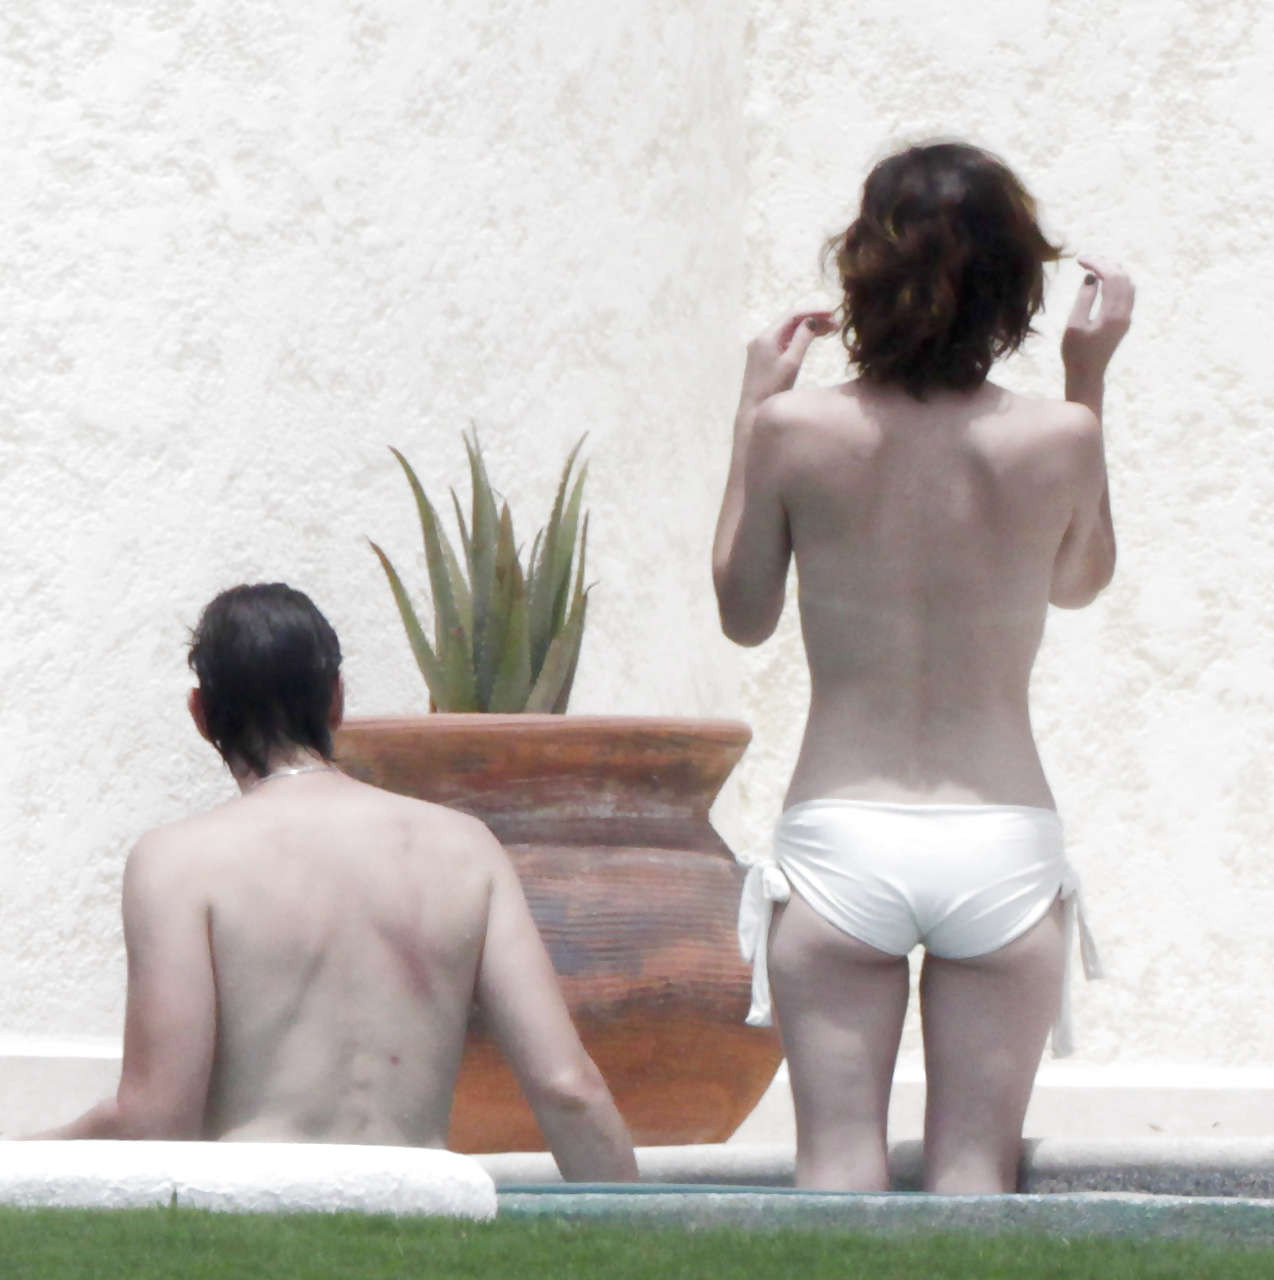 Milla Jovovich caught topless in pool by paparazzi and giving them middle finger #75289775